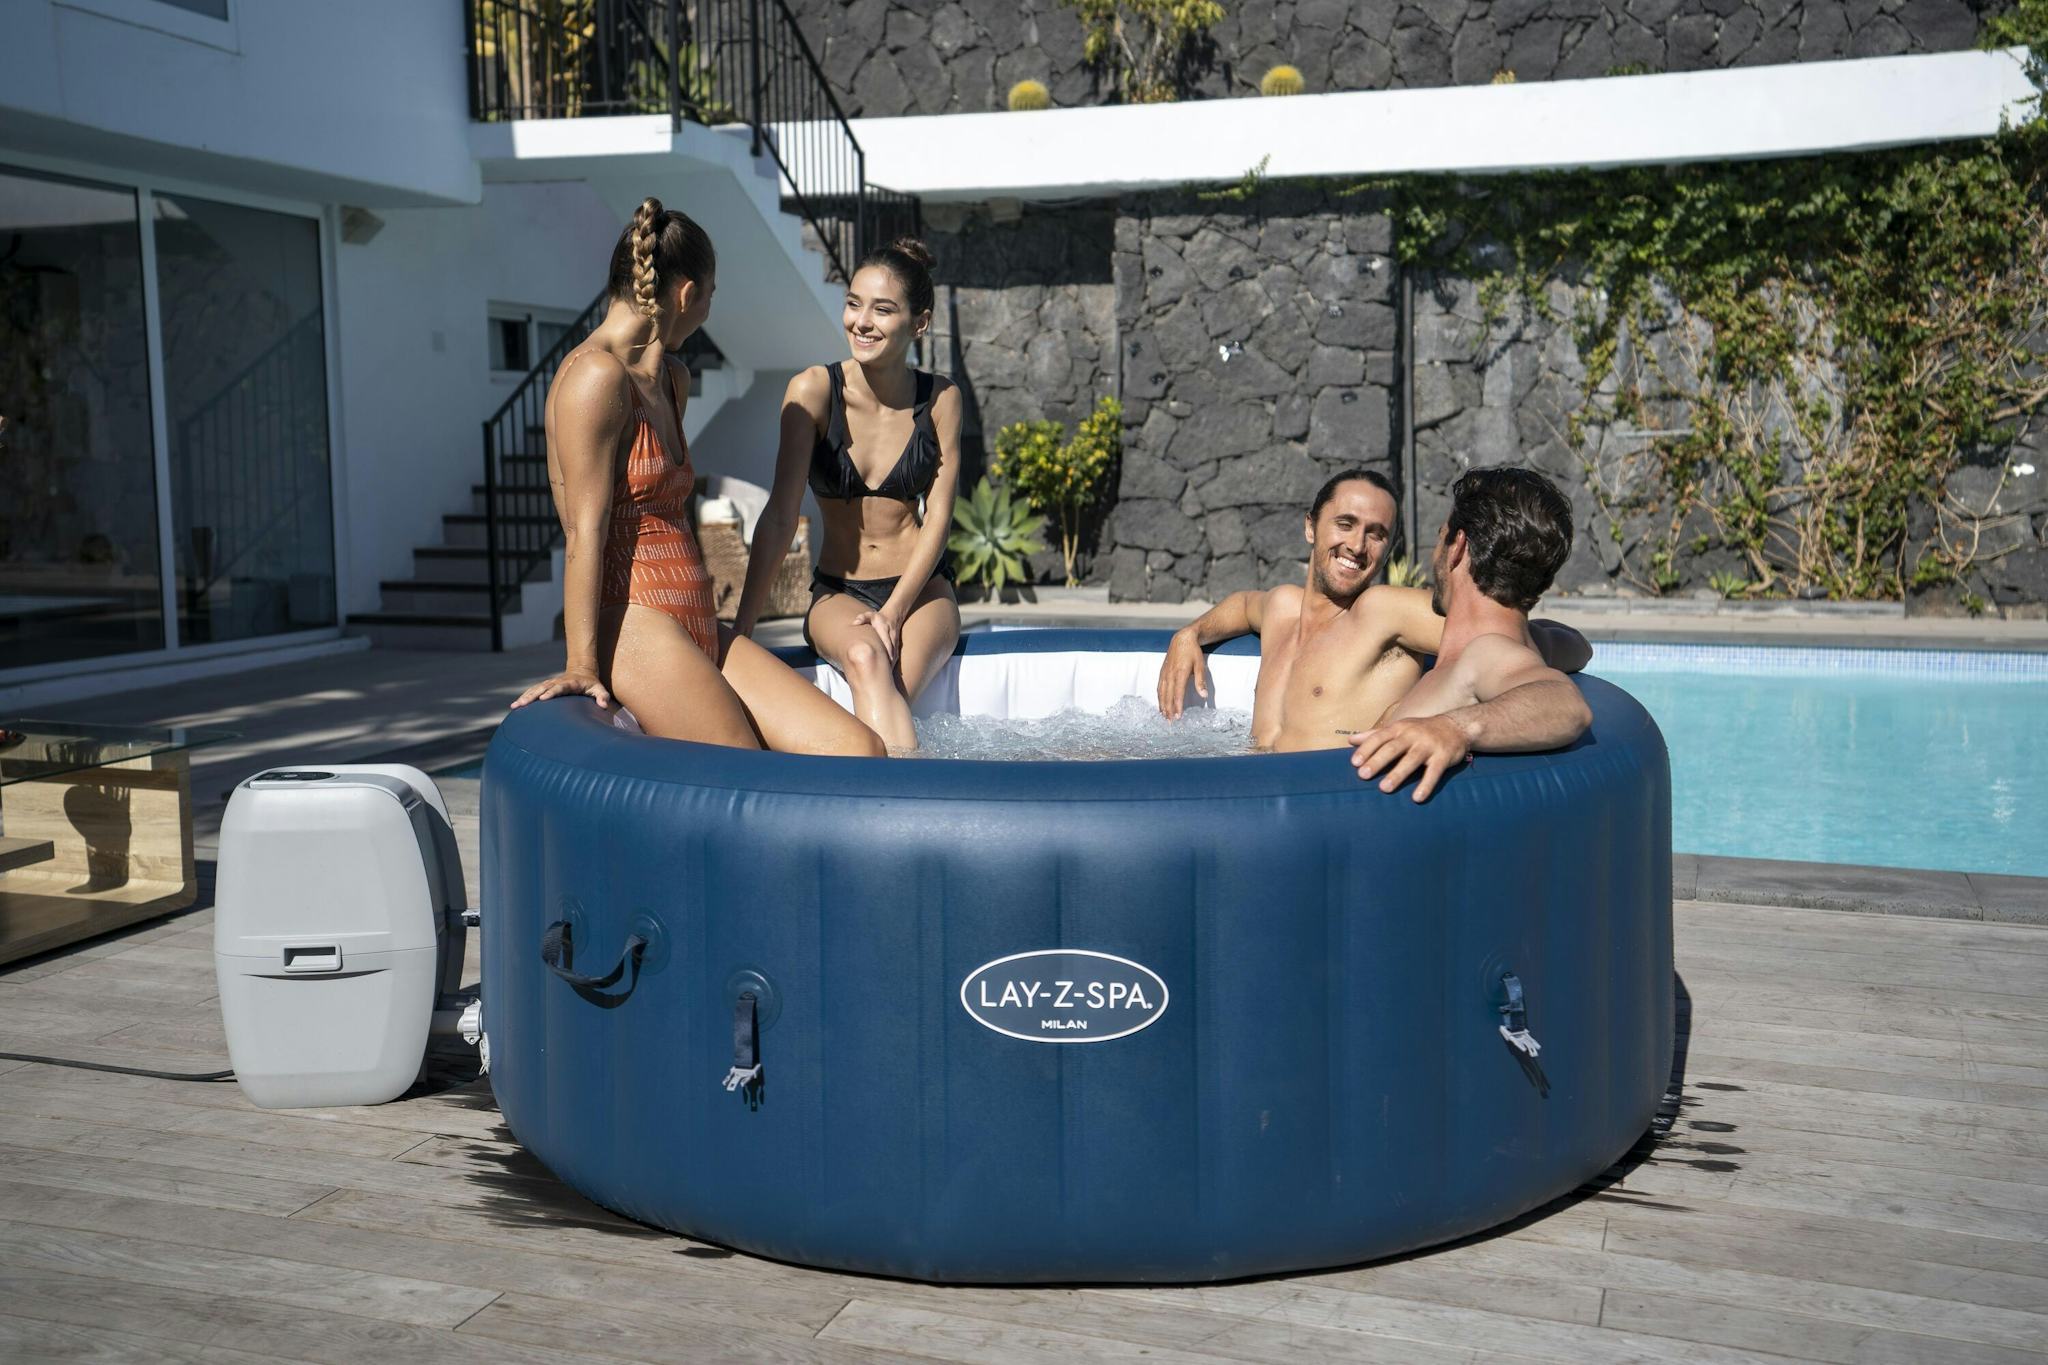 Spas Gonflables Spa gonflable rond Lay-Z-Spa Milan Airjet Plus™ 4 - 6 personnes Bestway 3